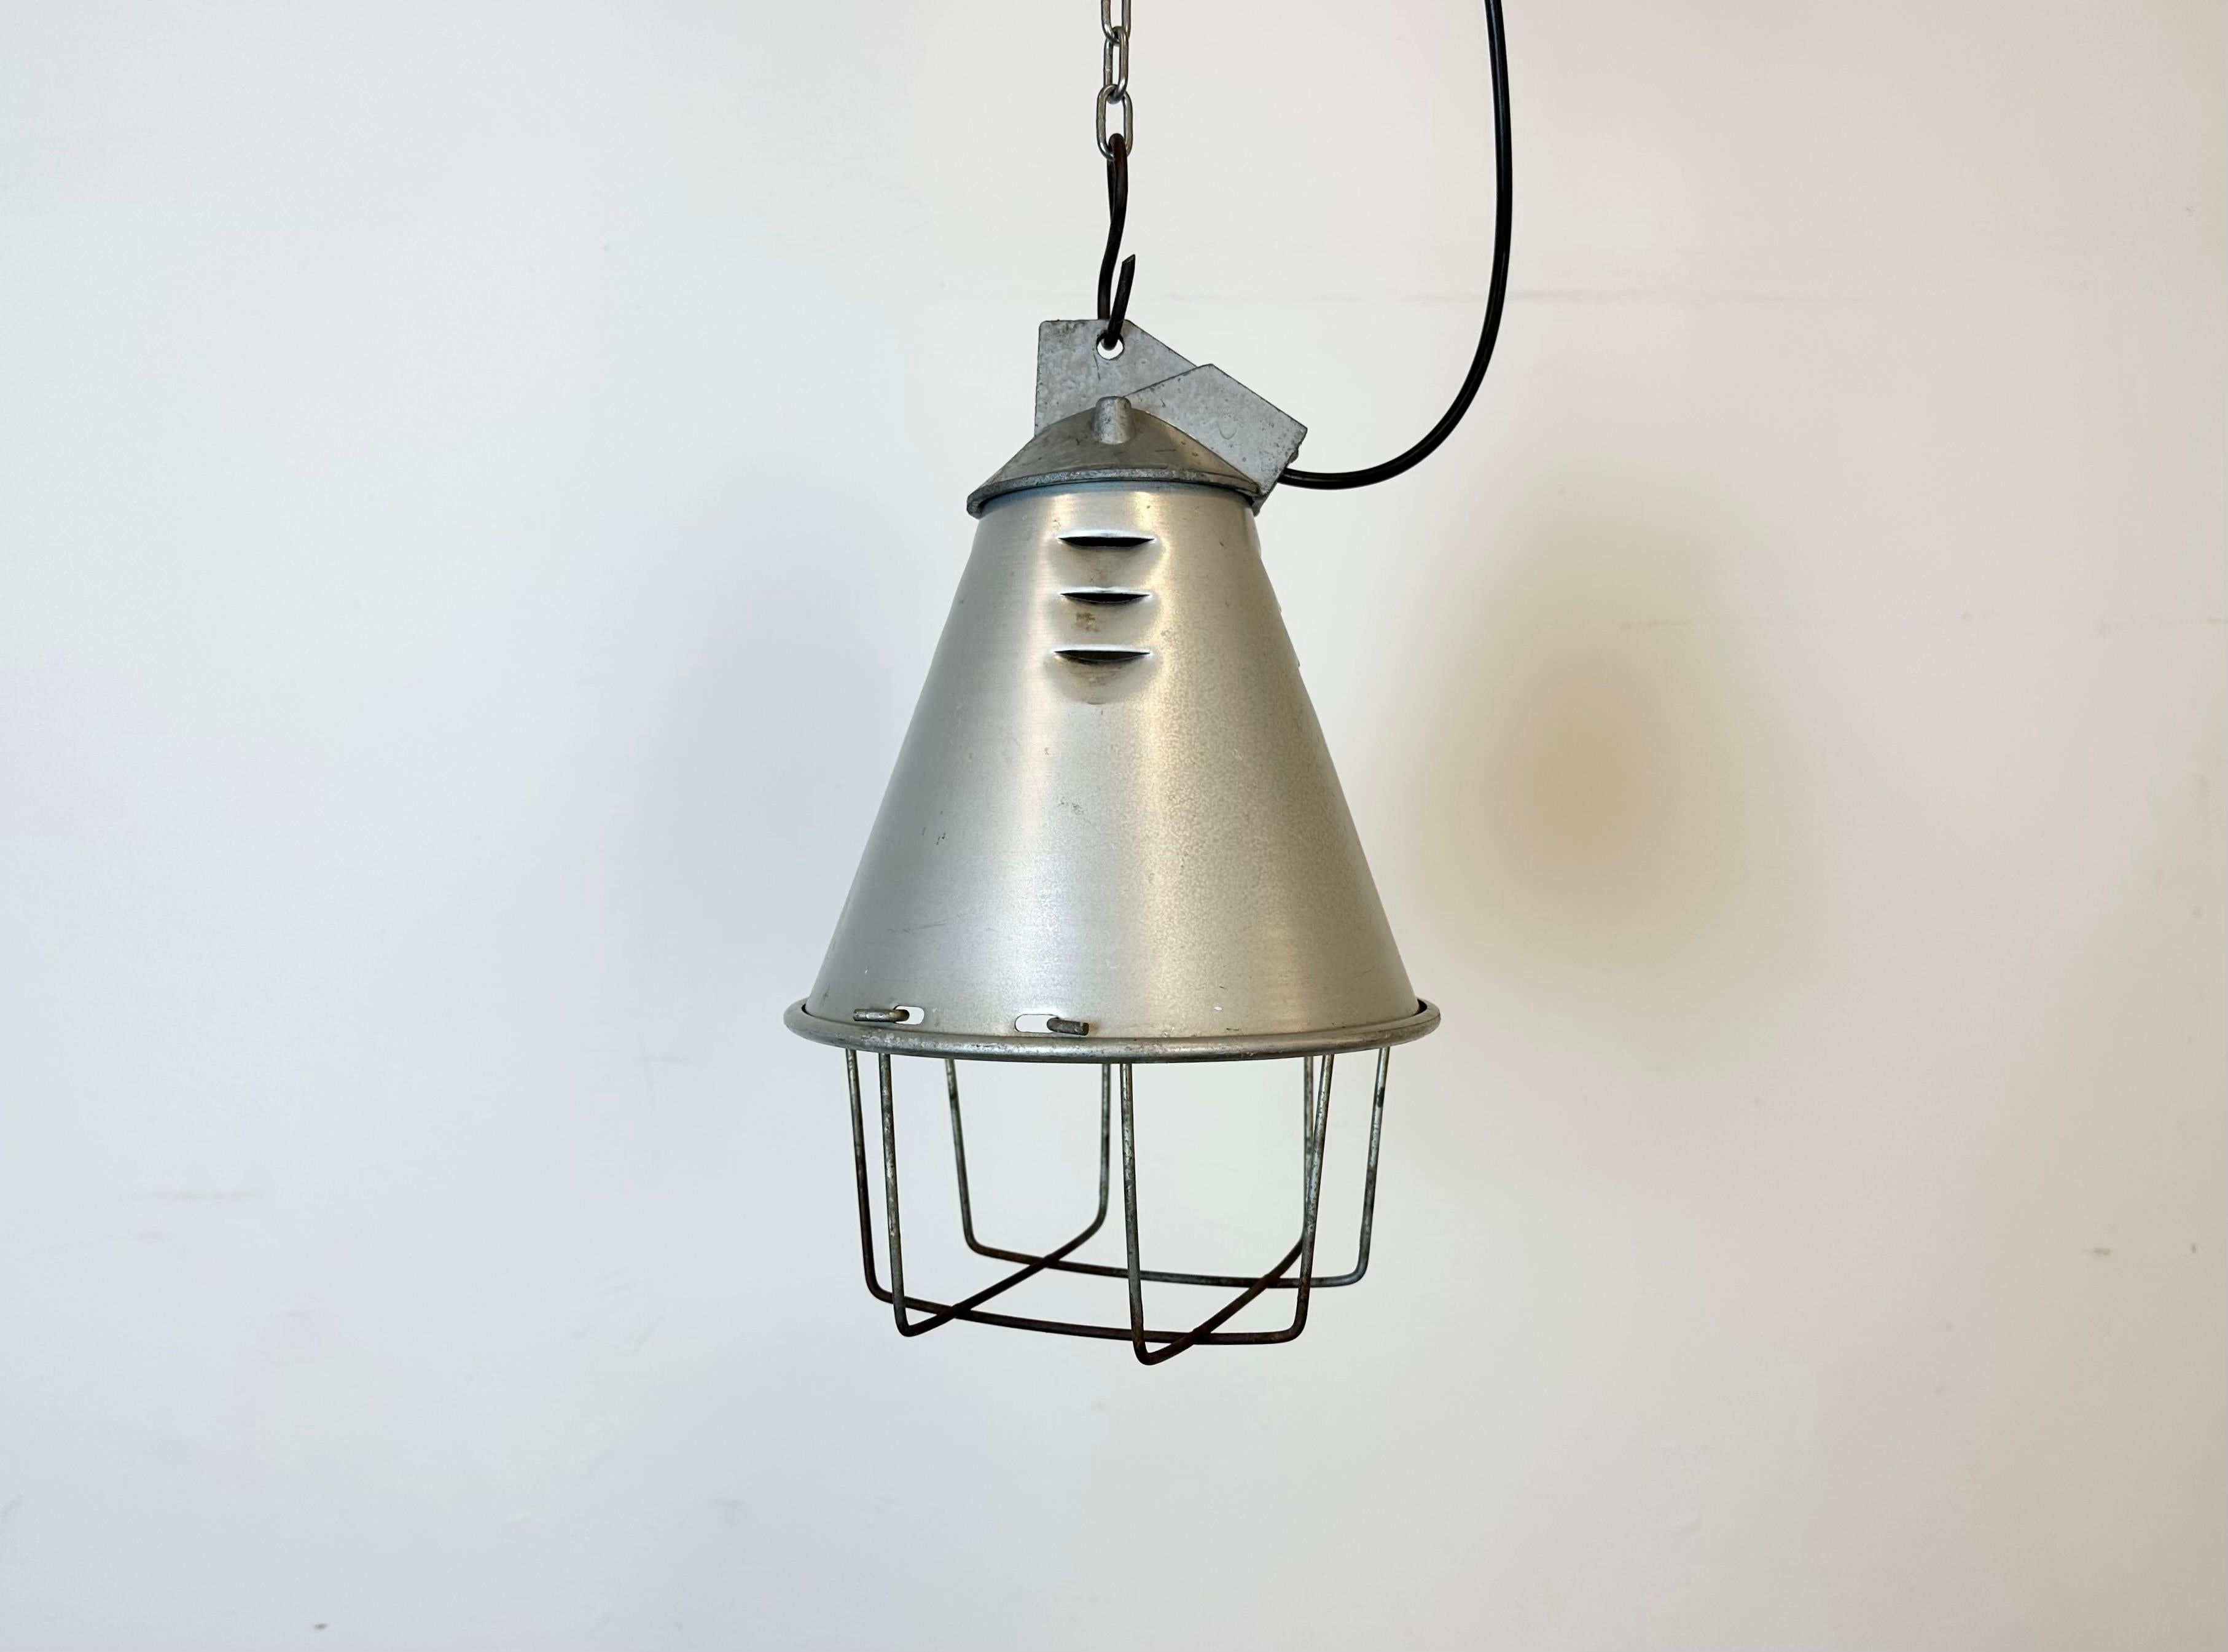 Industrial factory hanging lamp made by Polam Wilkasy in Poland during the 1970s. It features a grey aluminium shade, a cast aluminium top and an iron grid. The  porcelain socket requires standard E 27/ E 26 lightbulbs. New wire. The weight of the